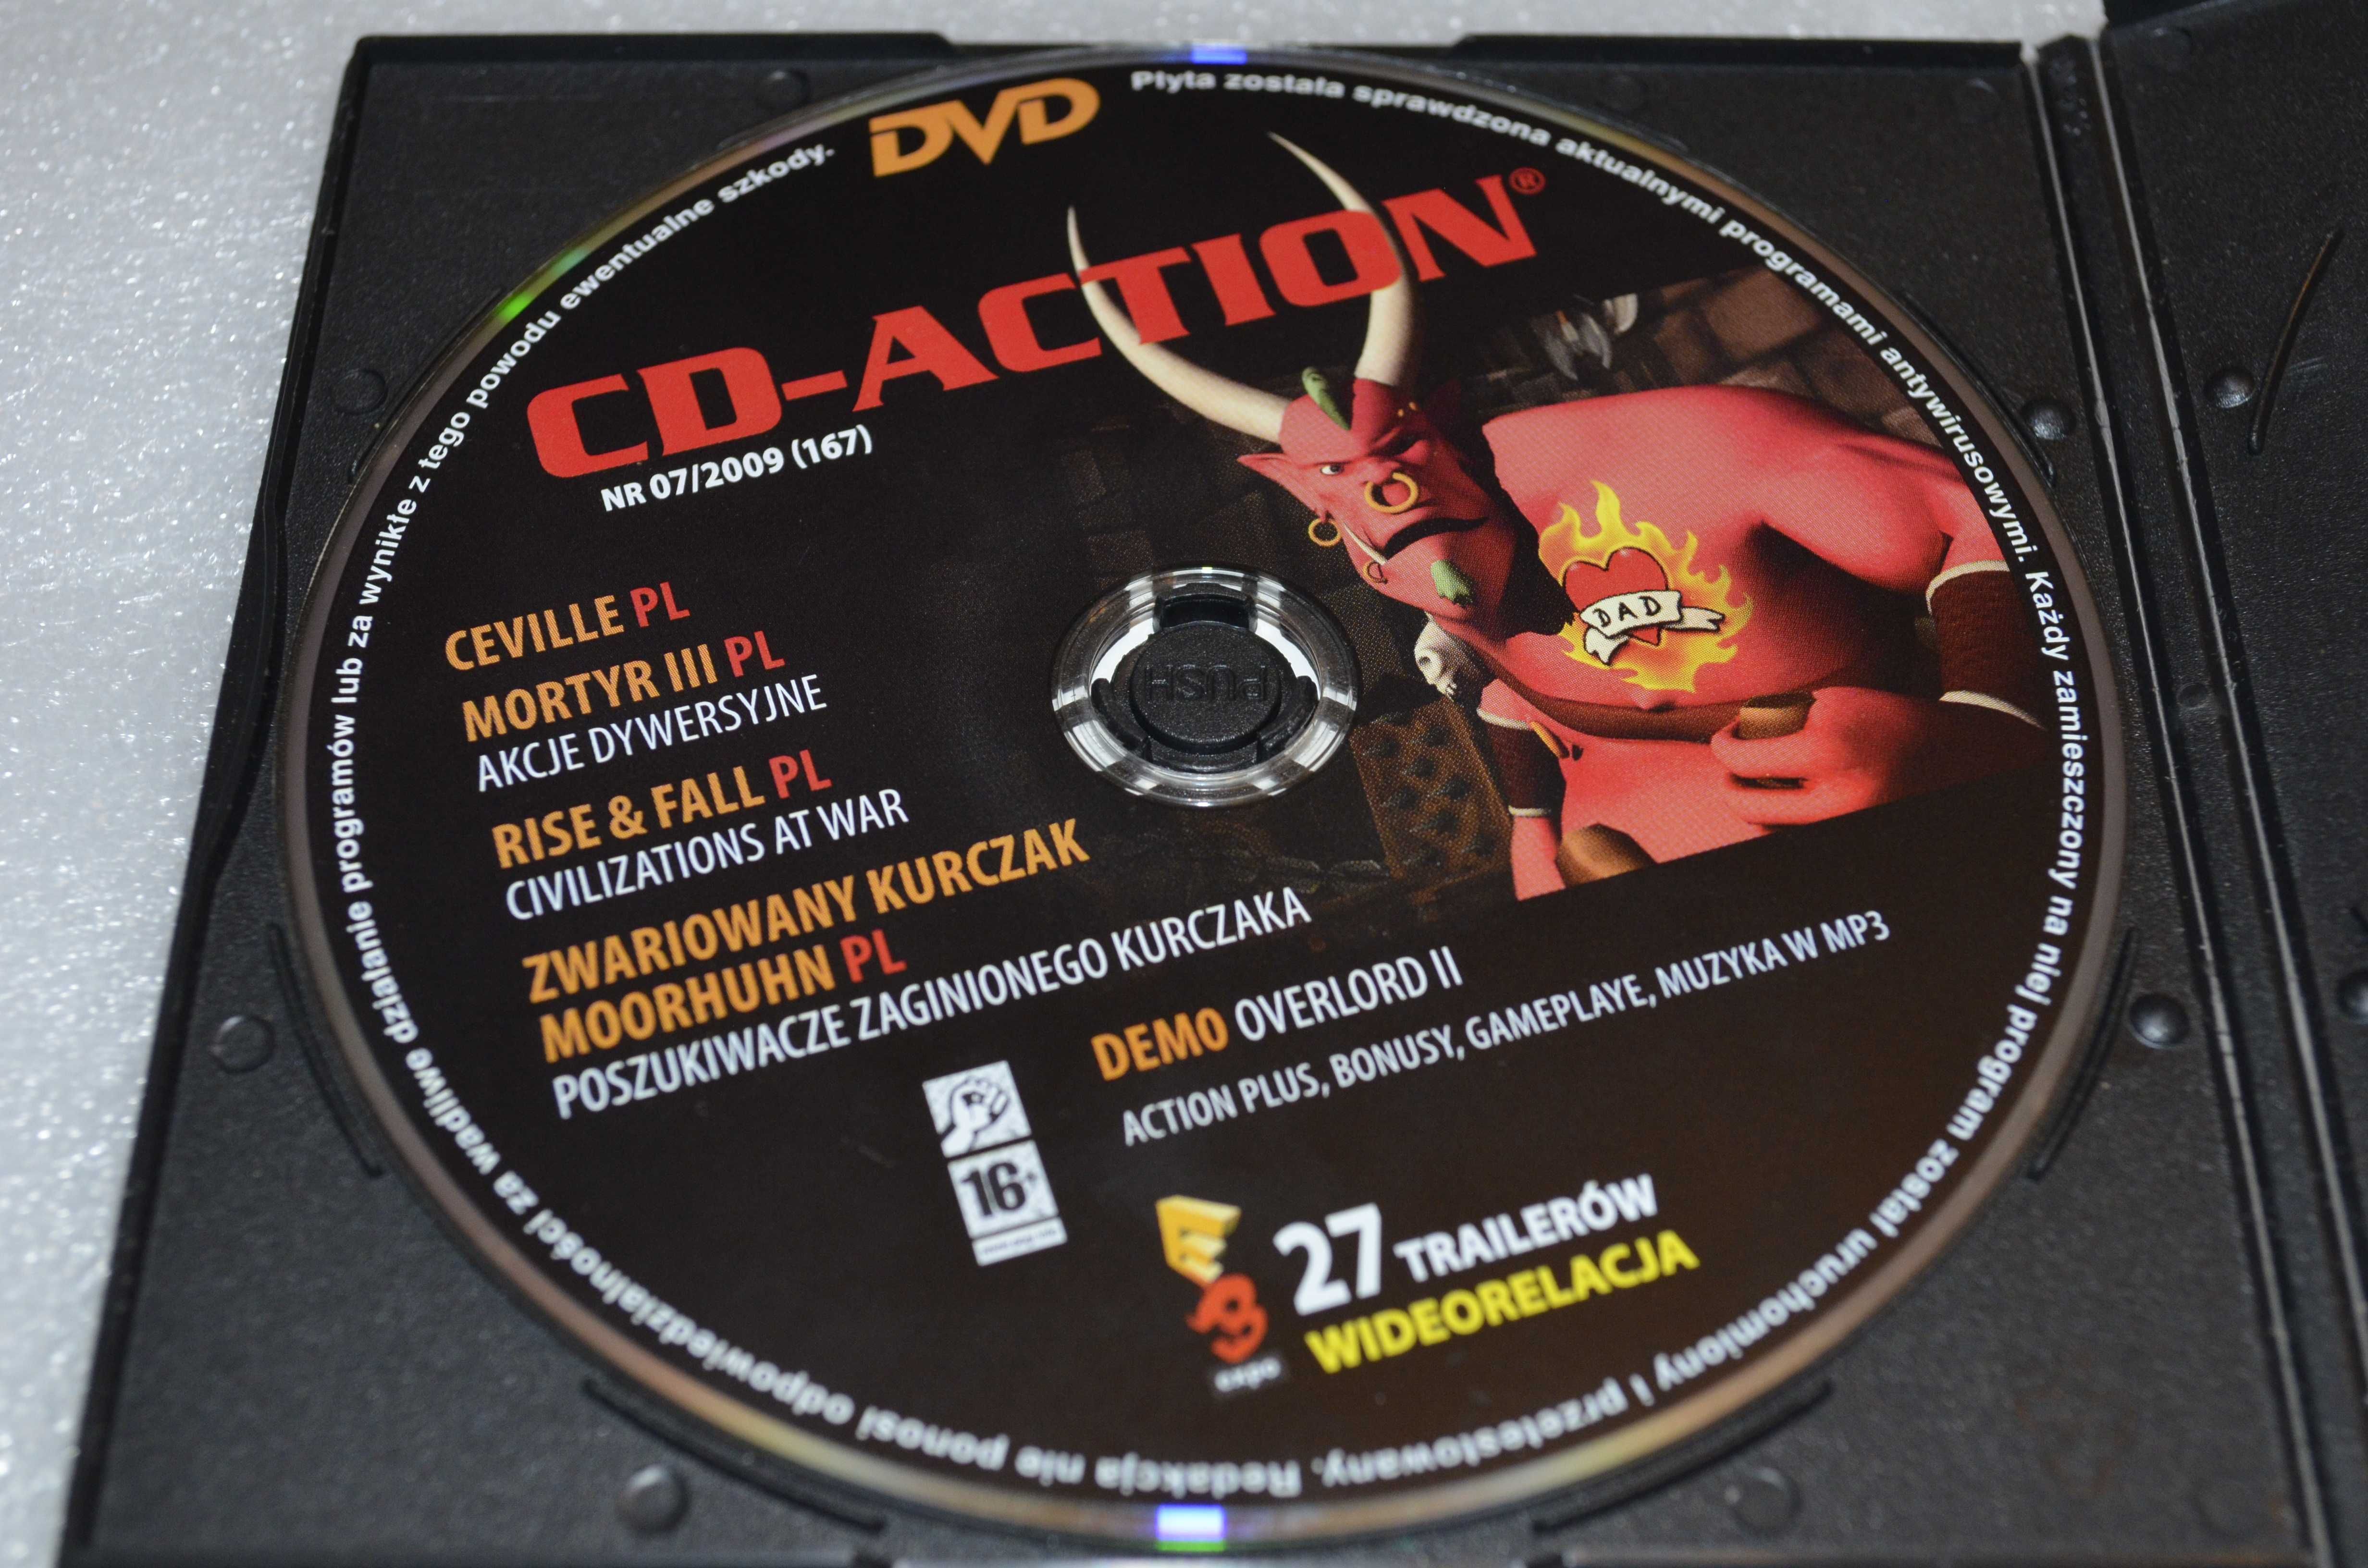 Gry PC CD-Action DVD nr 167: Ceville, Mortyr III, Rise & Fall